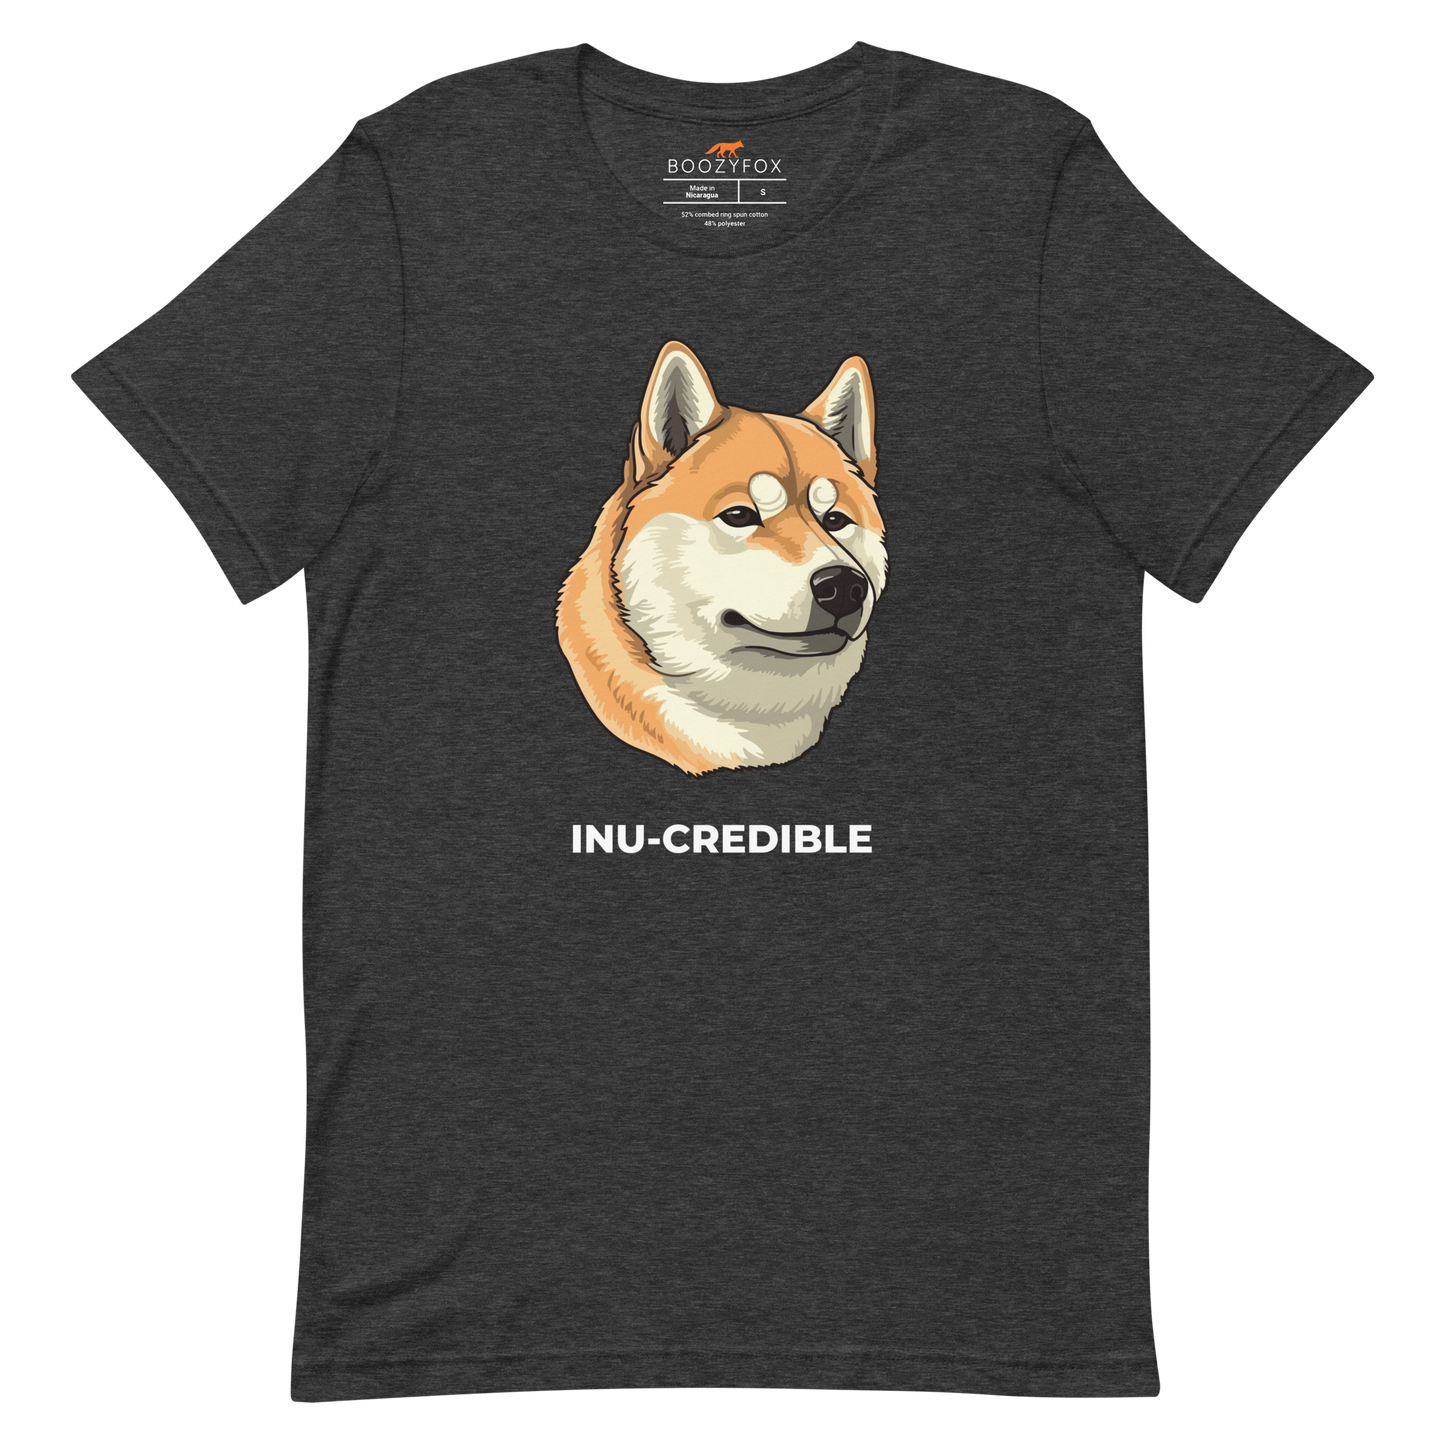 Dark Grey Heather Premium Shiba Inu T-Shirt featuring the Inu-Credible graphic on the chest - Funny Graphic Shiba Inu Tees - Boozy Fox